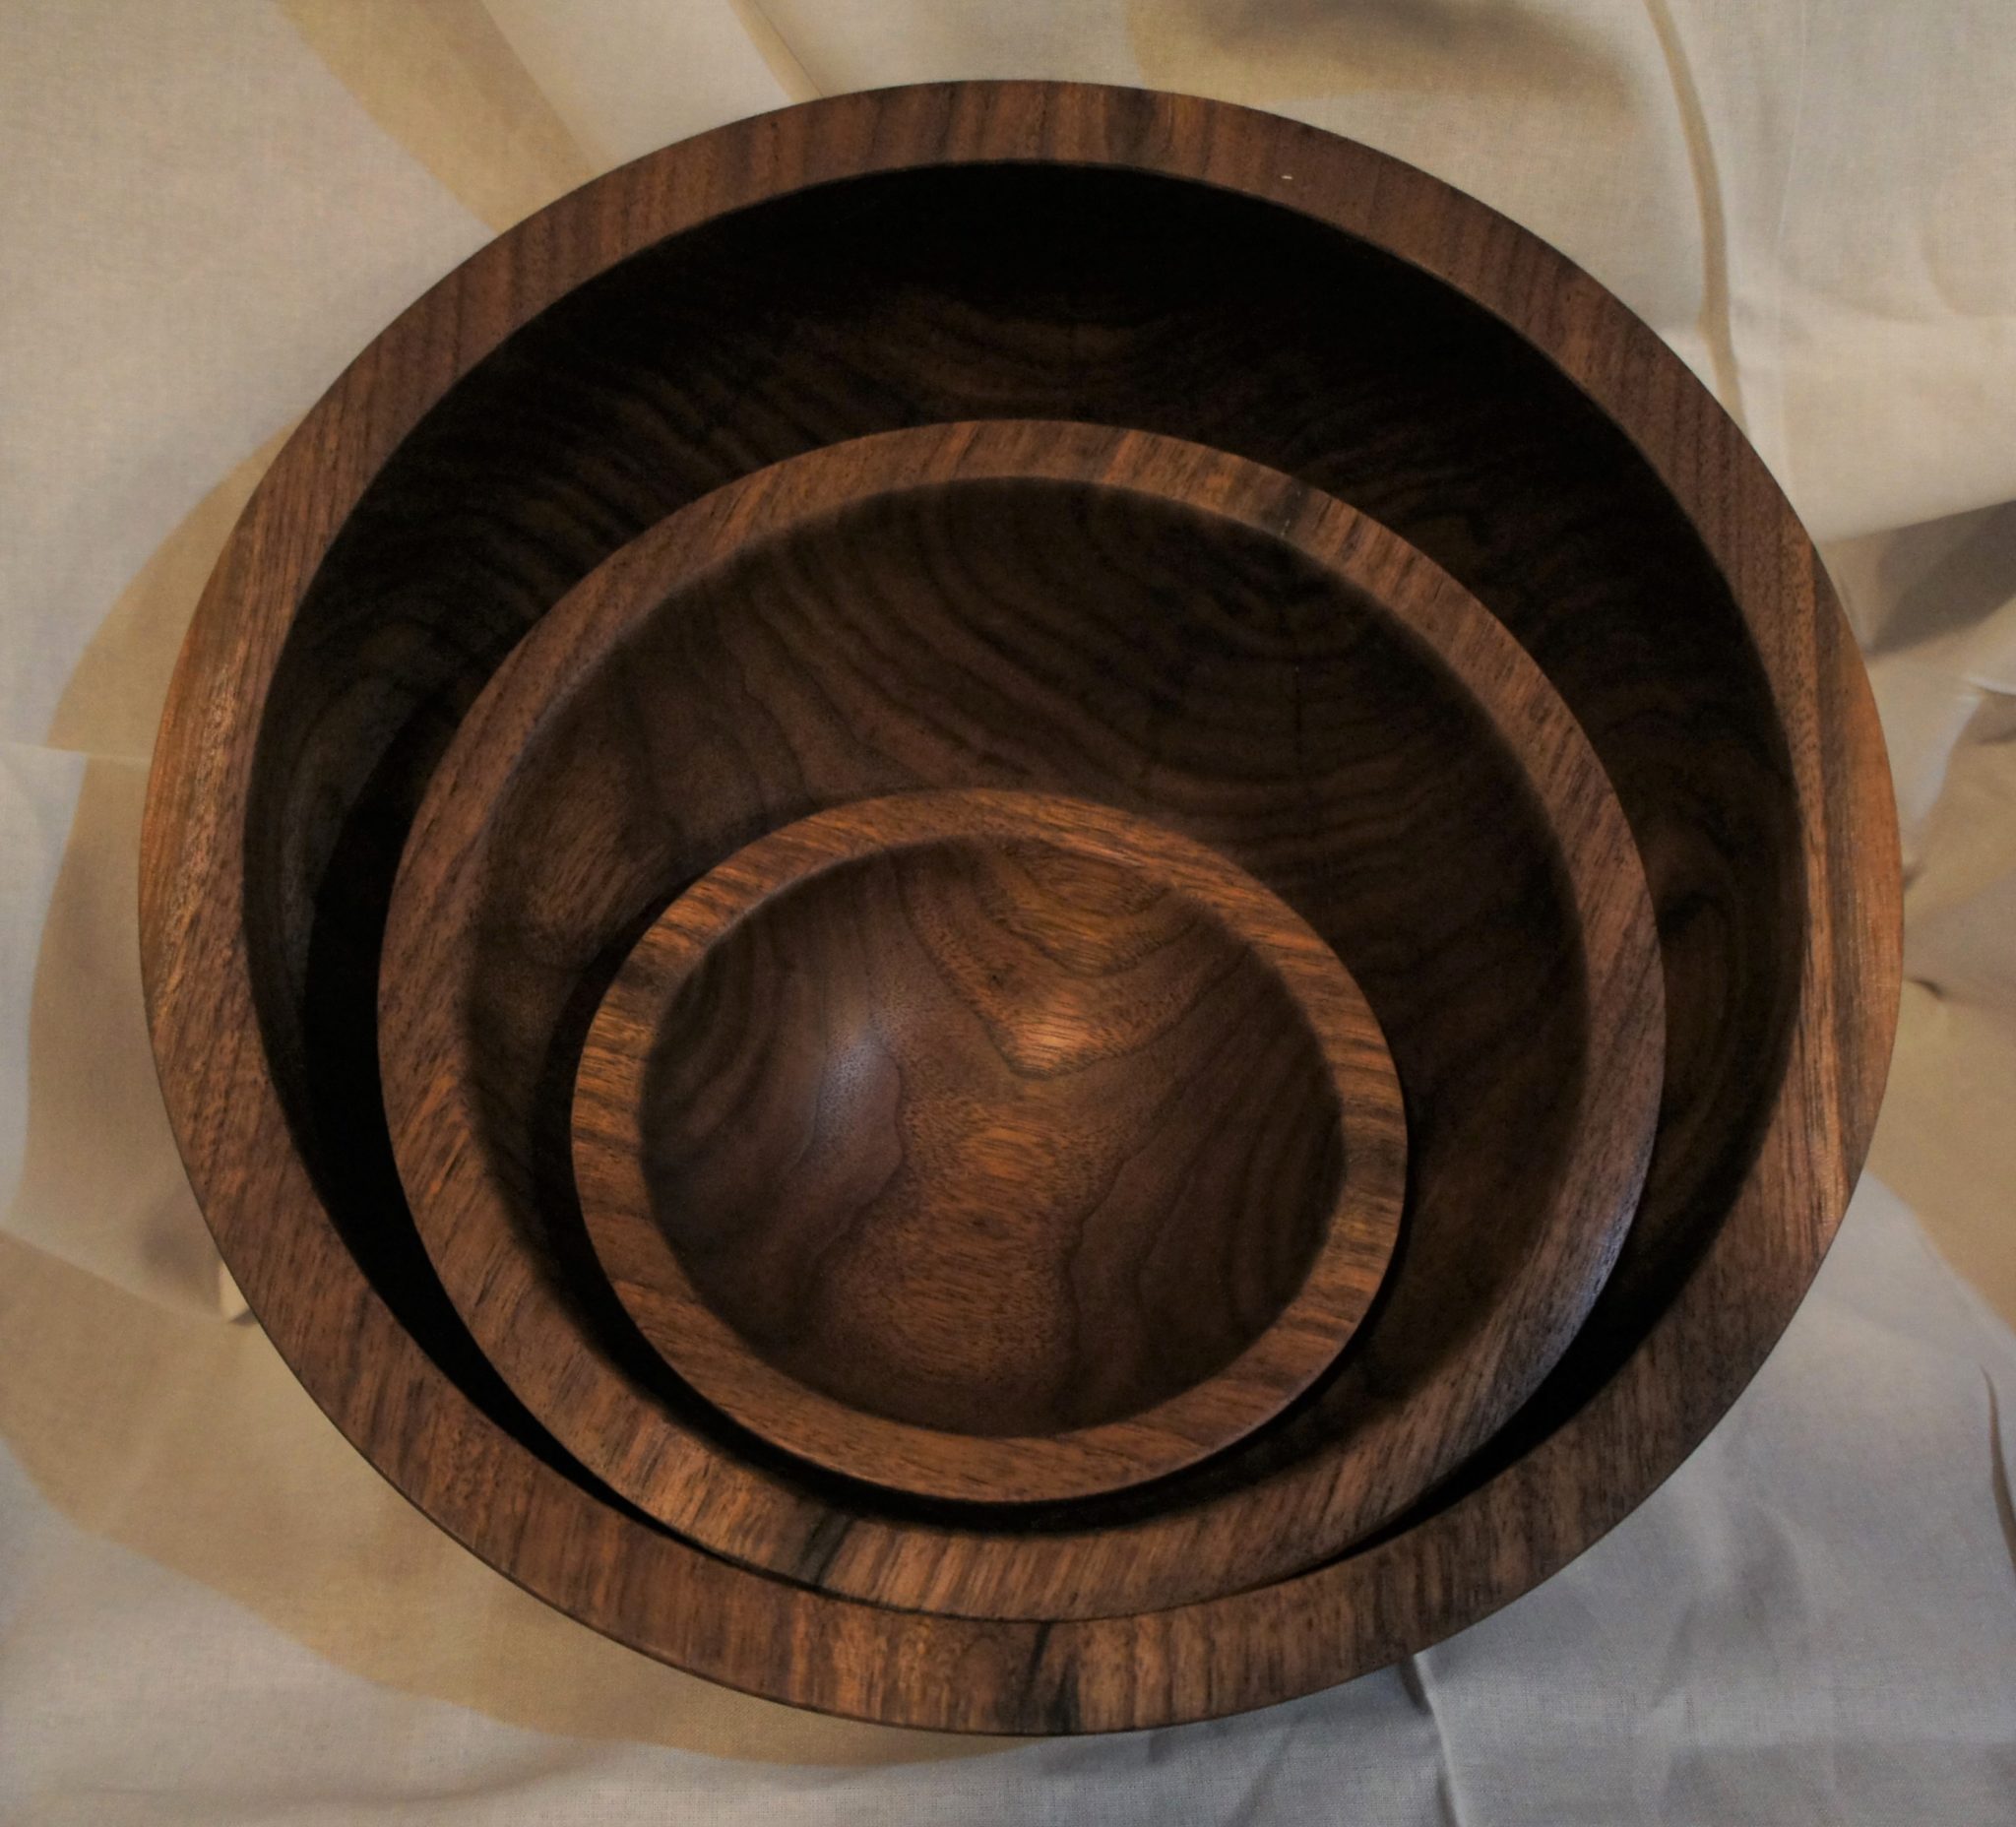 Set of three bowls cored from the same piece of walnut